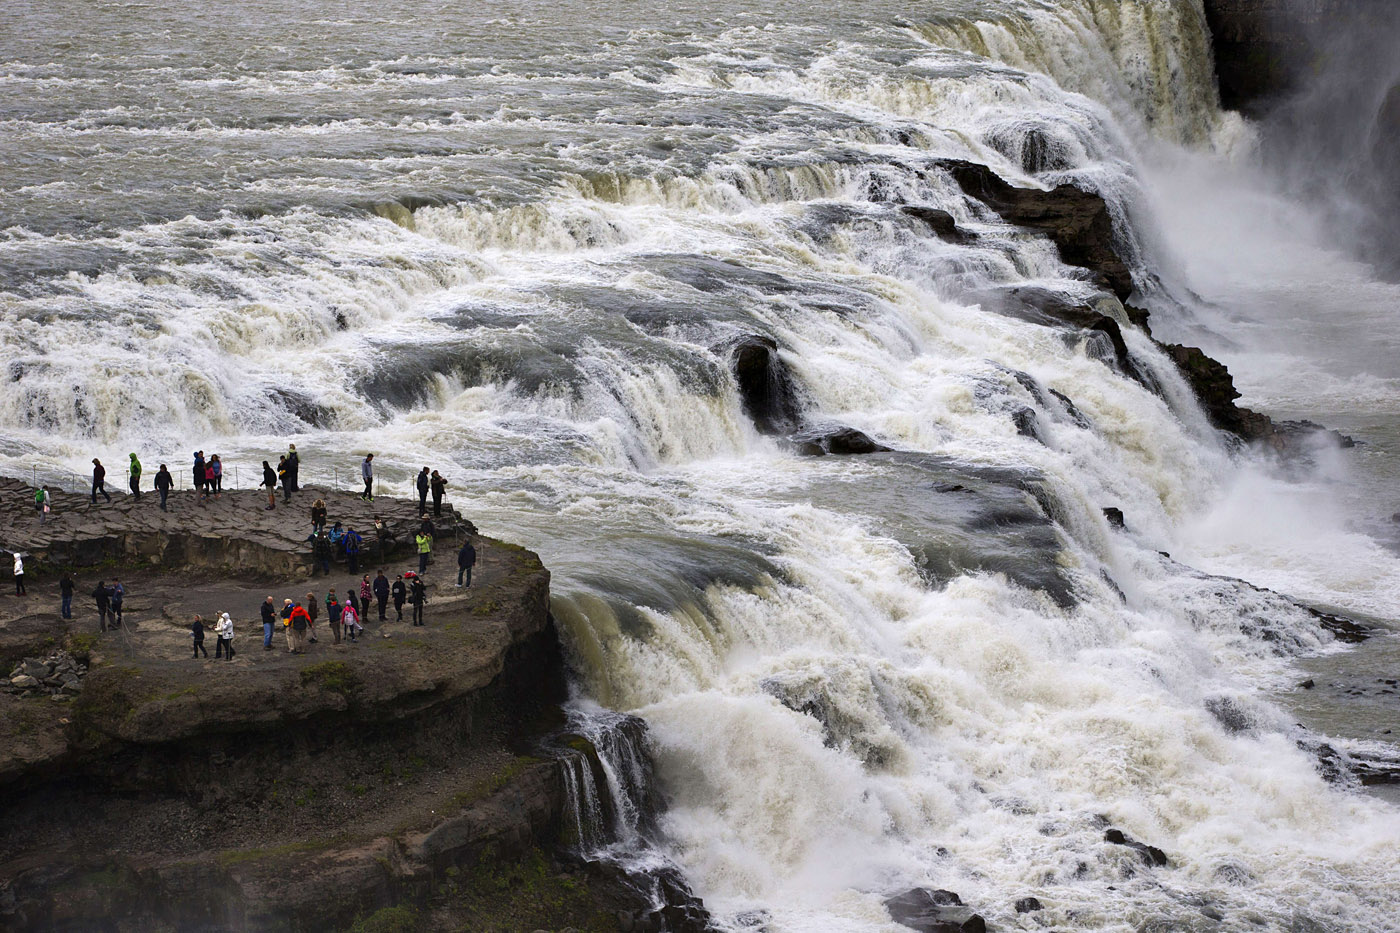 View of the Gullfoss water falls on the river Hvita near Haukadalur in southwestern Iceland on July 6, 2014.AFP PHOTO / JOEL SAGET(Photo credit should read JOEL SAGET/AFP/Getty Images)